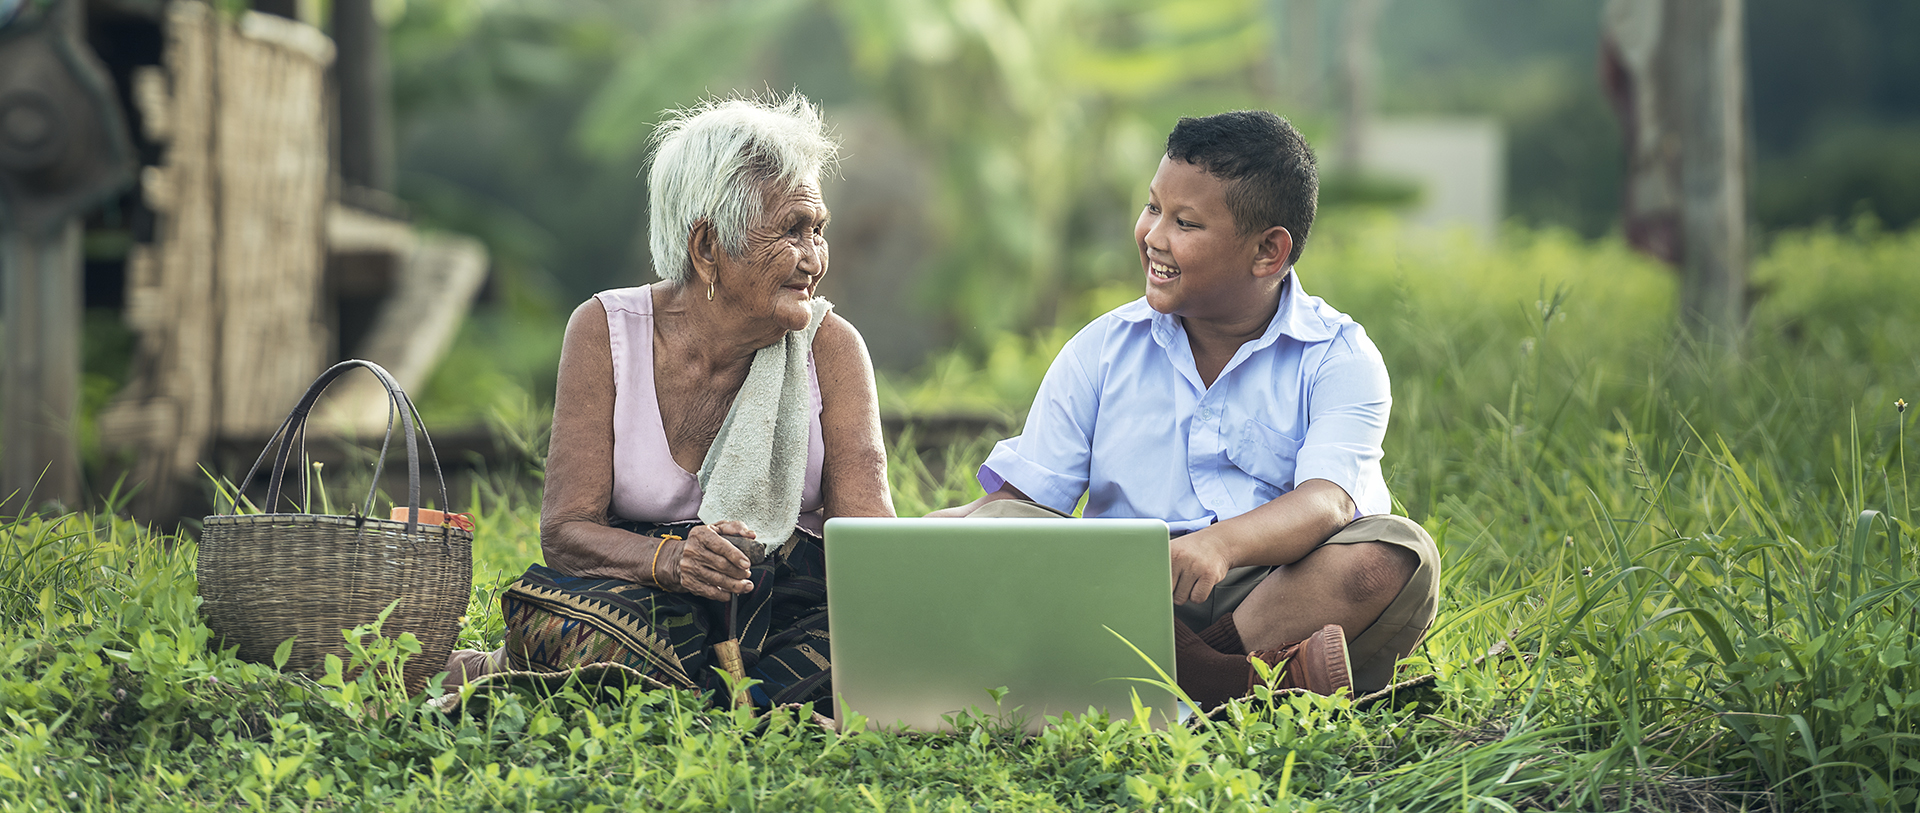 Improving The Digital Landscape In The Philippines For Better Financial Inclusion